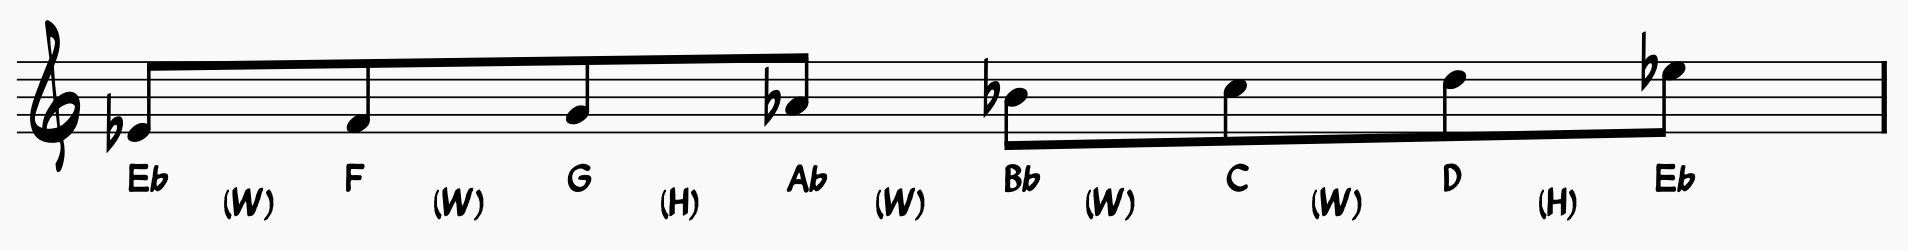 E Flat Major Scale notated with whole steps and half steps